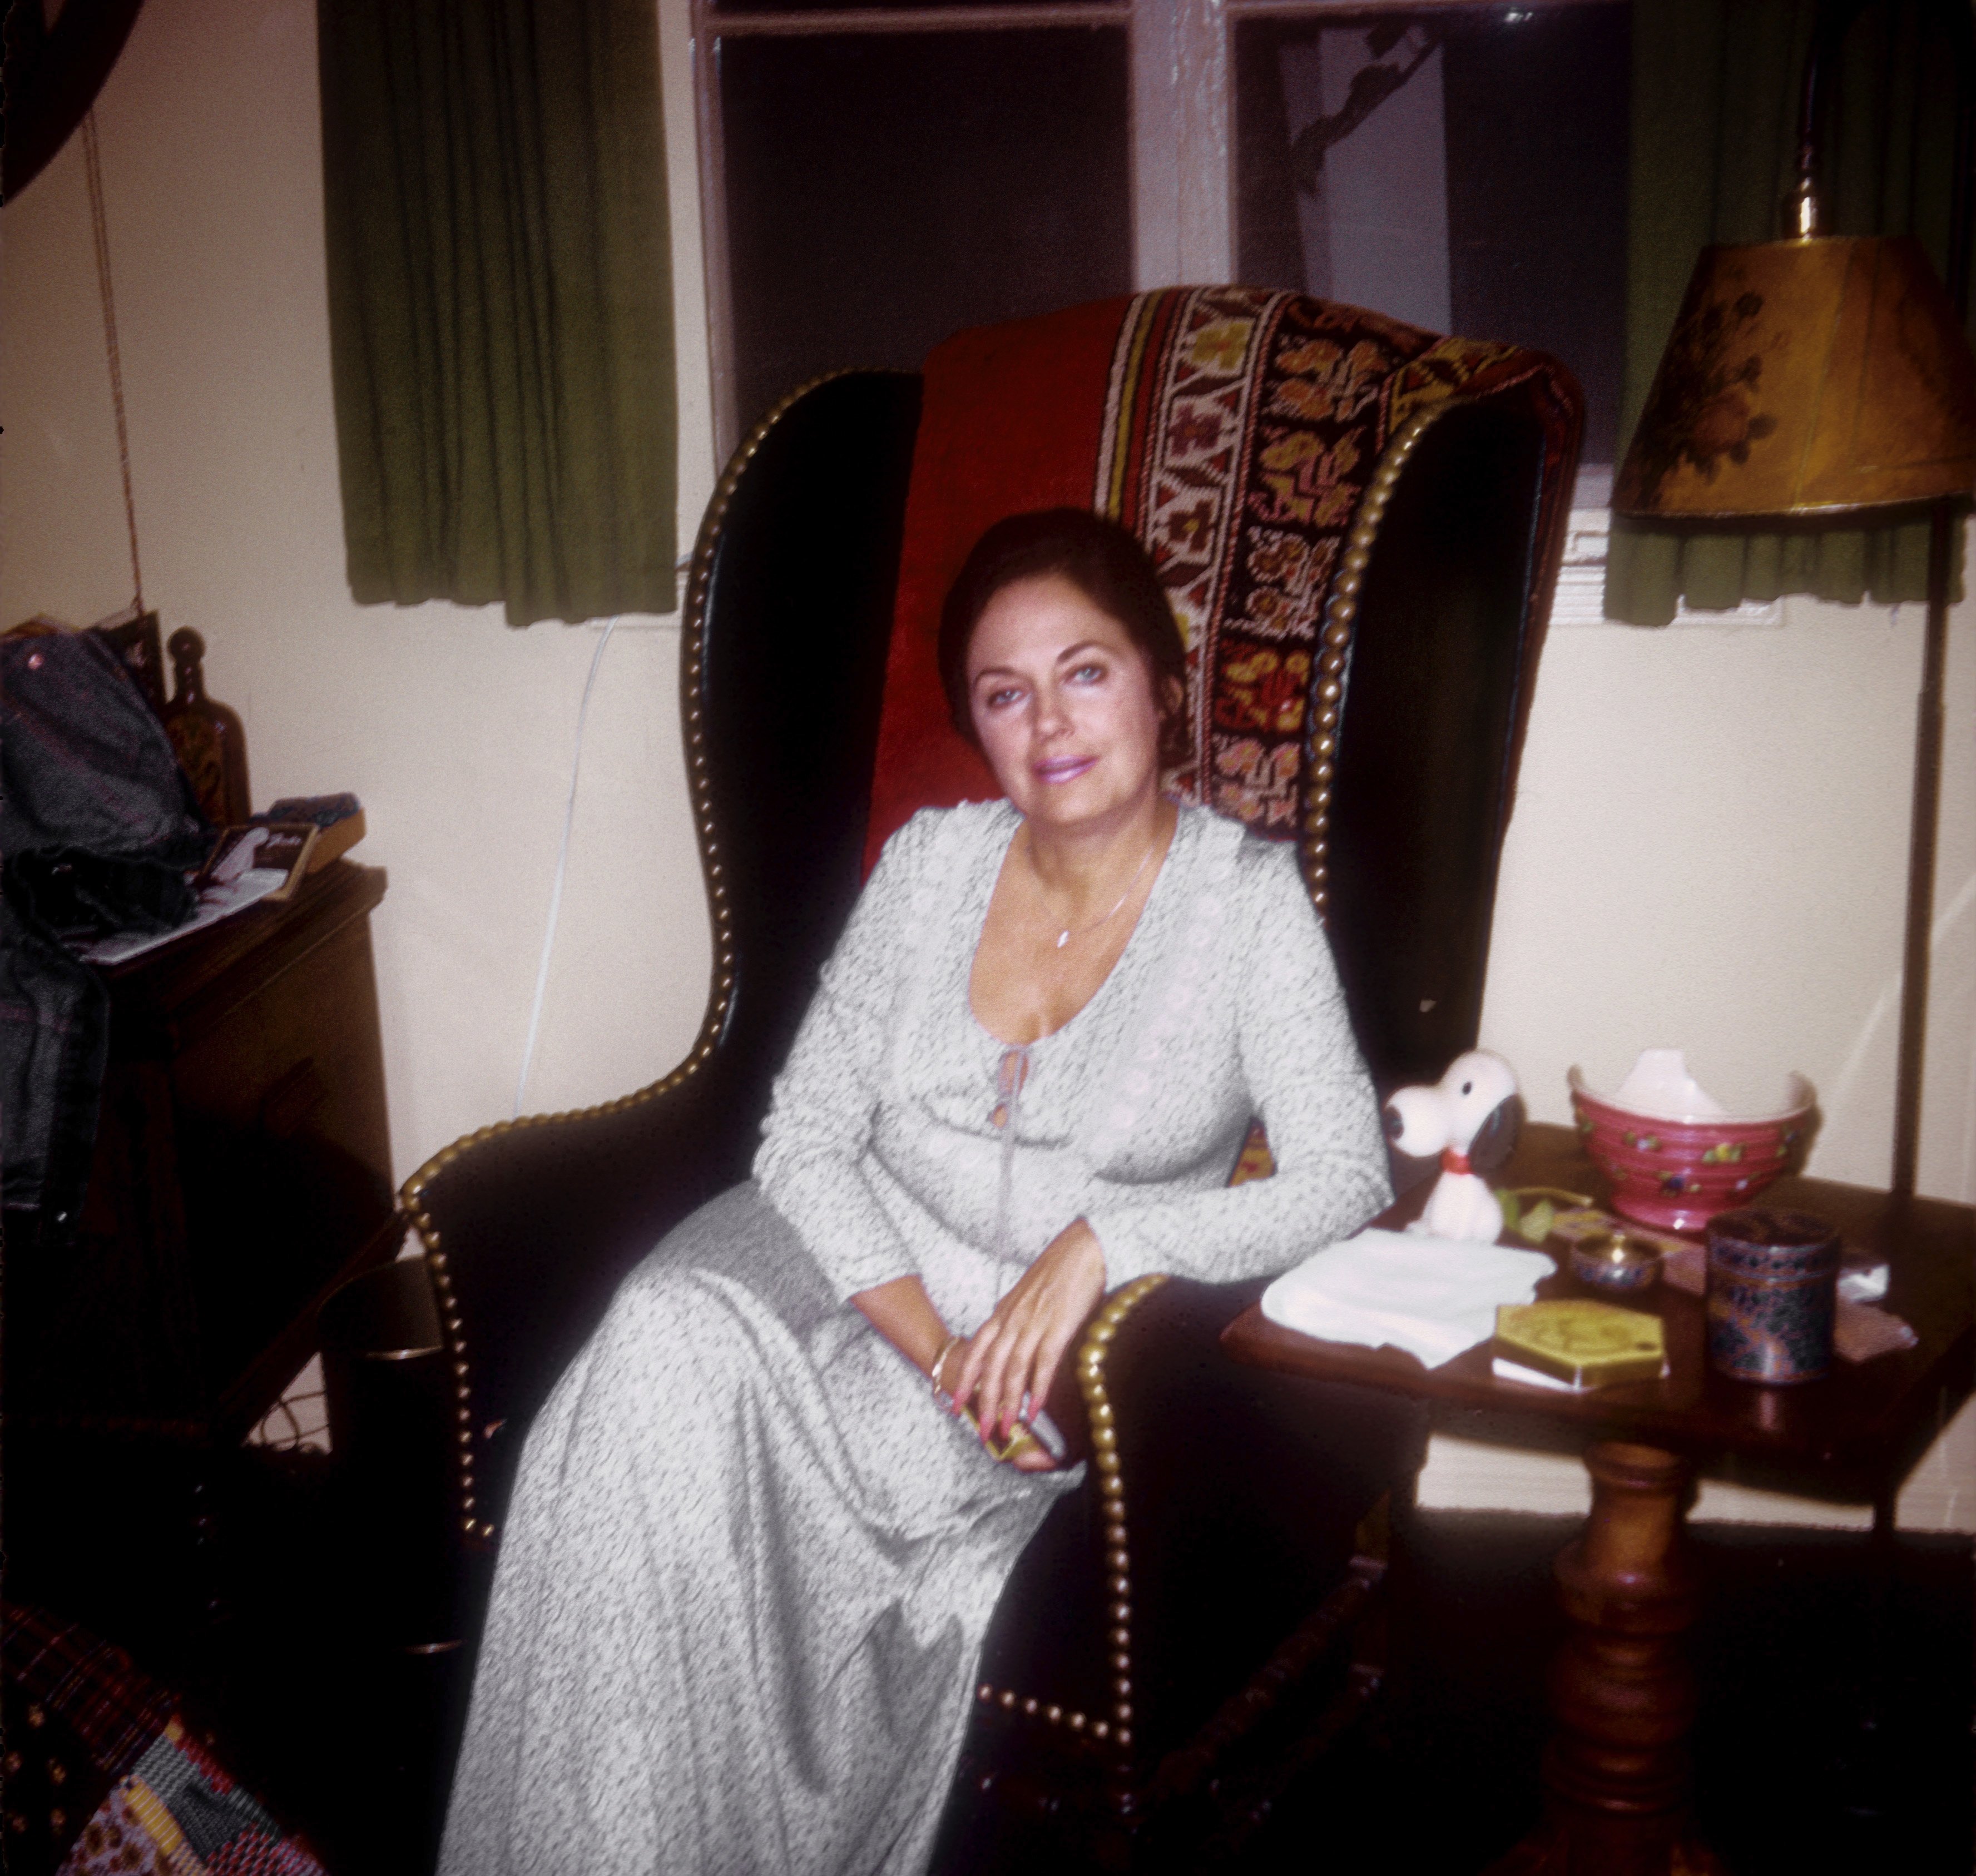 Actress Evelyn Ward (mother of David Cassidy) poses for a portrait at home in October 1972 in Los Angeles, California. | Source: Getty Images